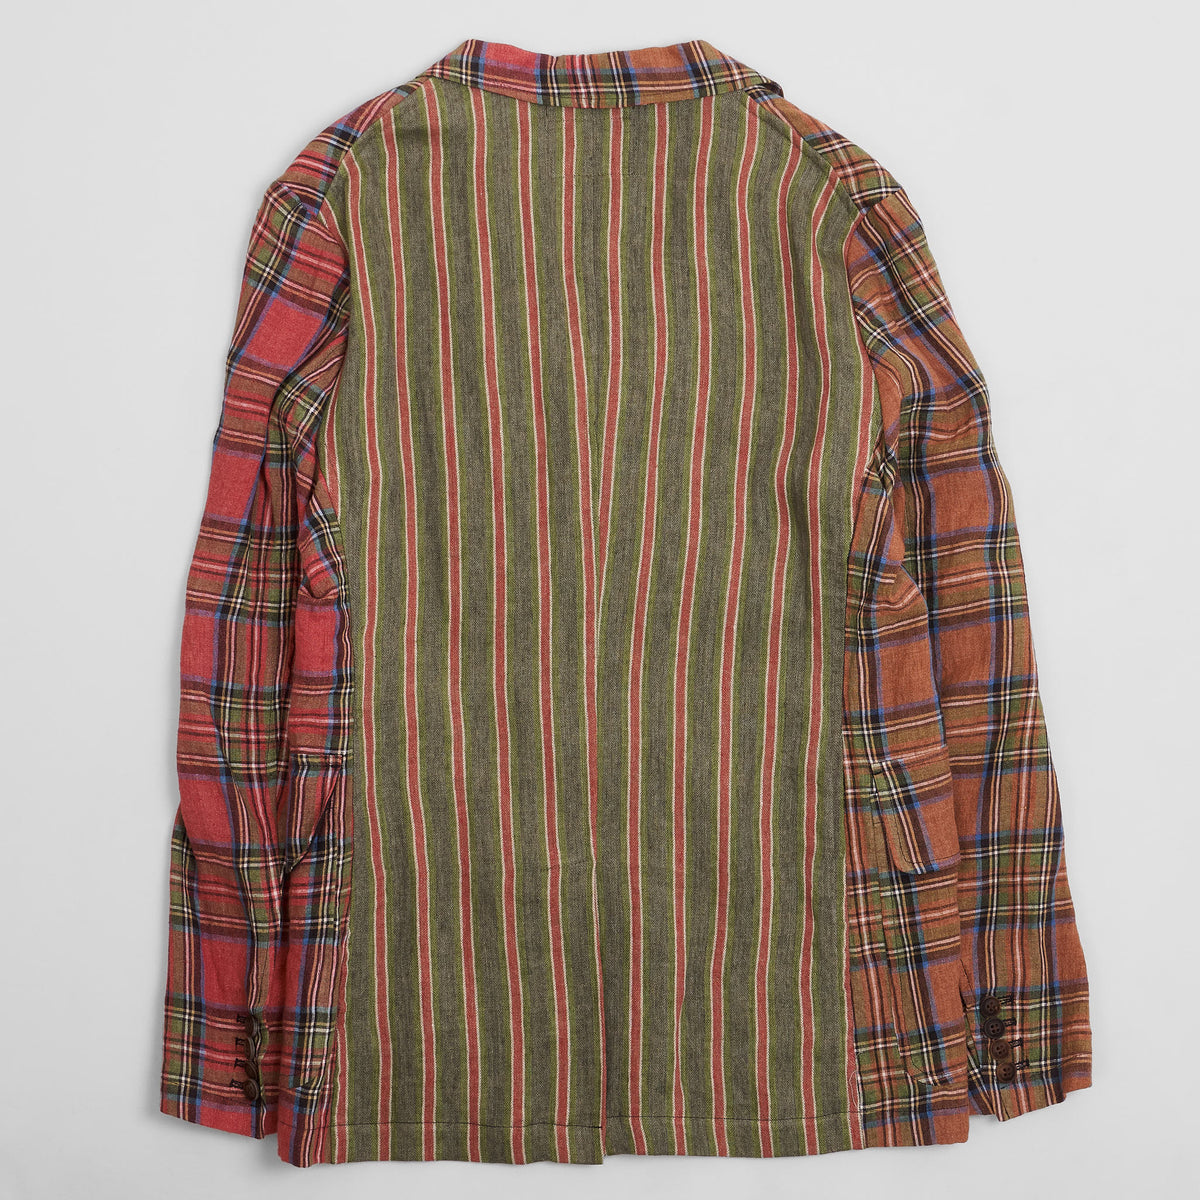 Nigel Cabourn Light Colorful Check Jacket